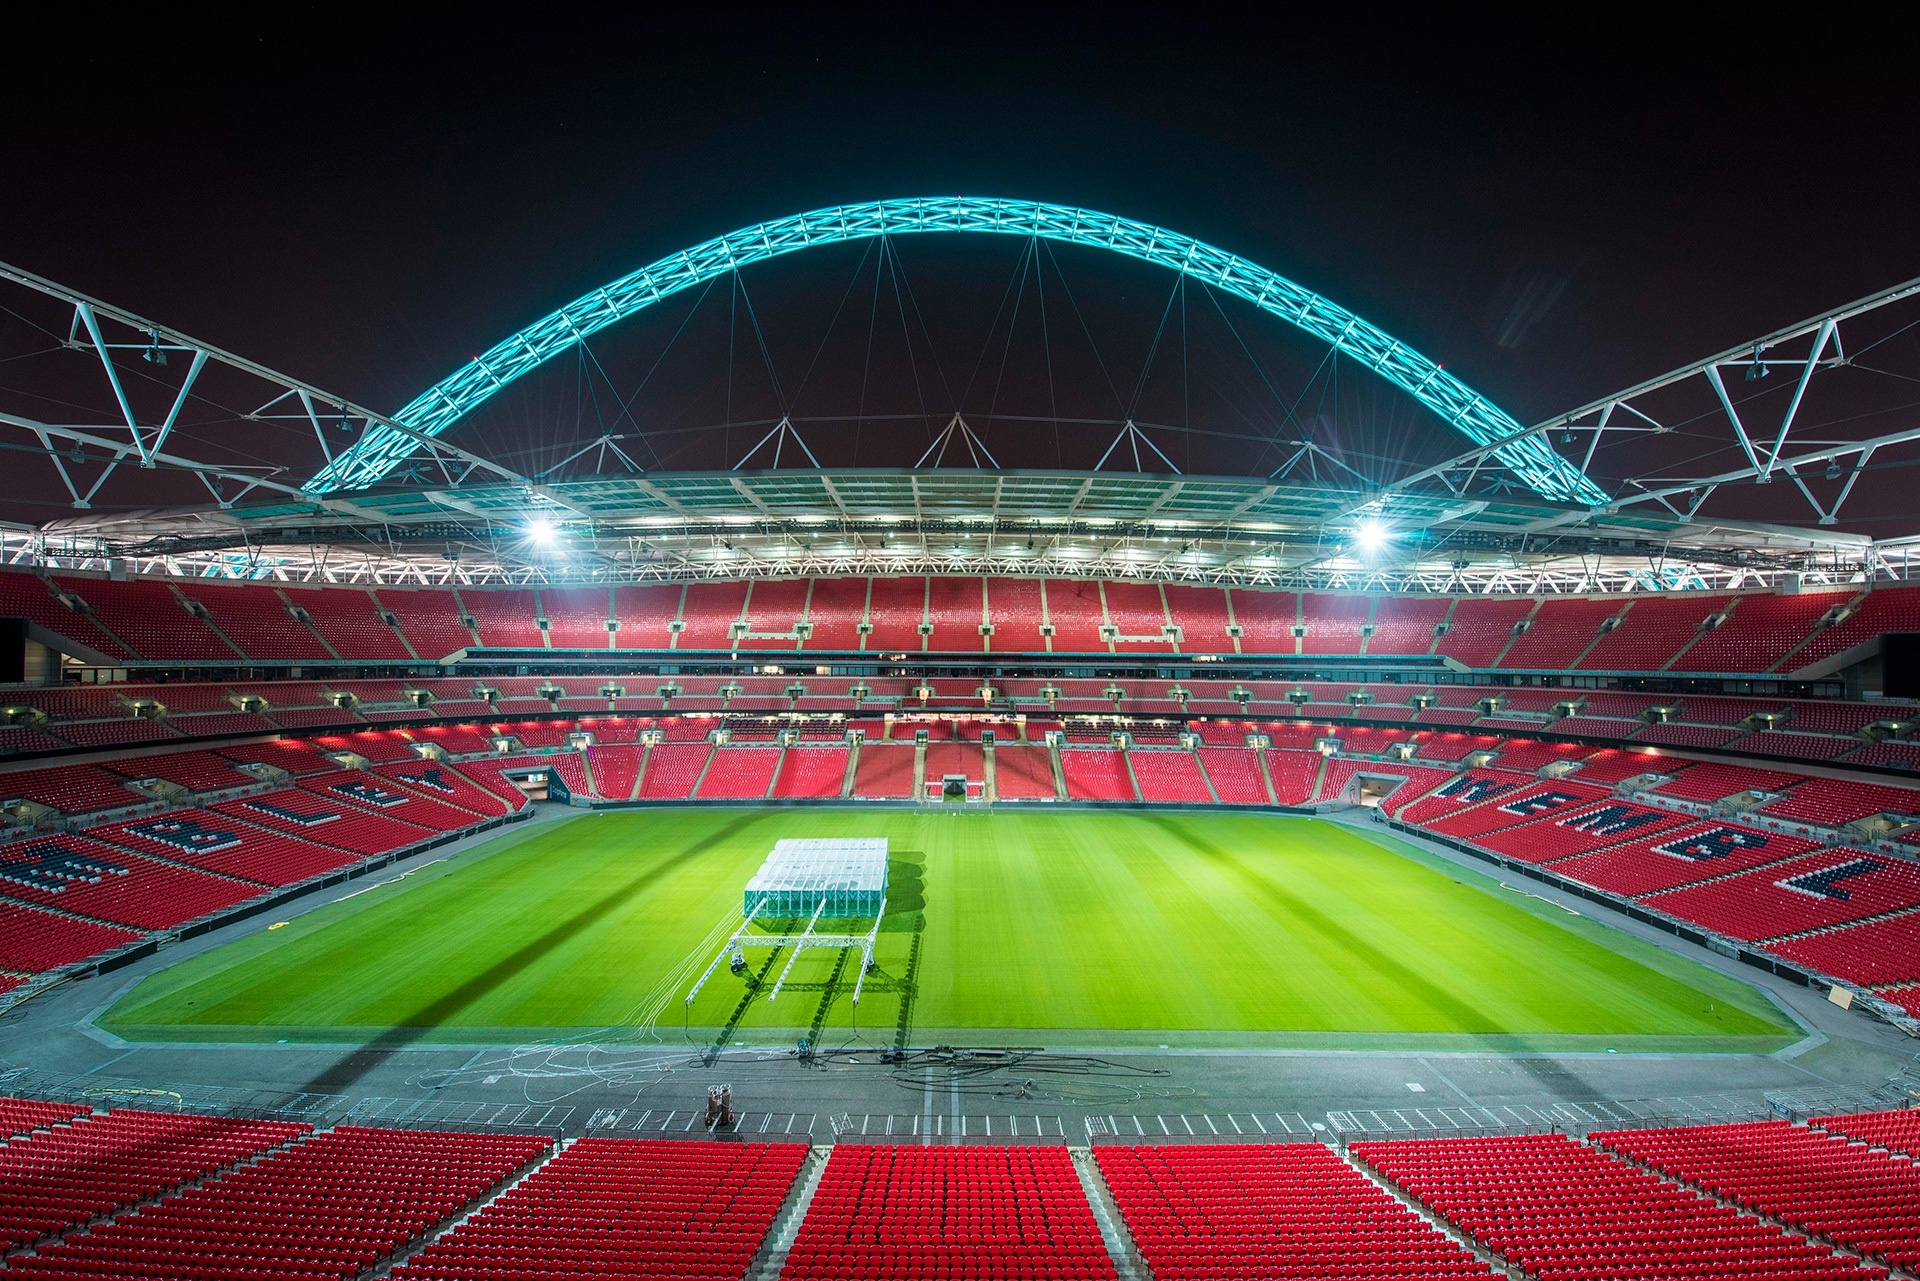 Wembley Stadium: The Headquarters of The English national team, Designed by Populous and Foster and Partners. 1920x1290 HD Wallpaper.